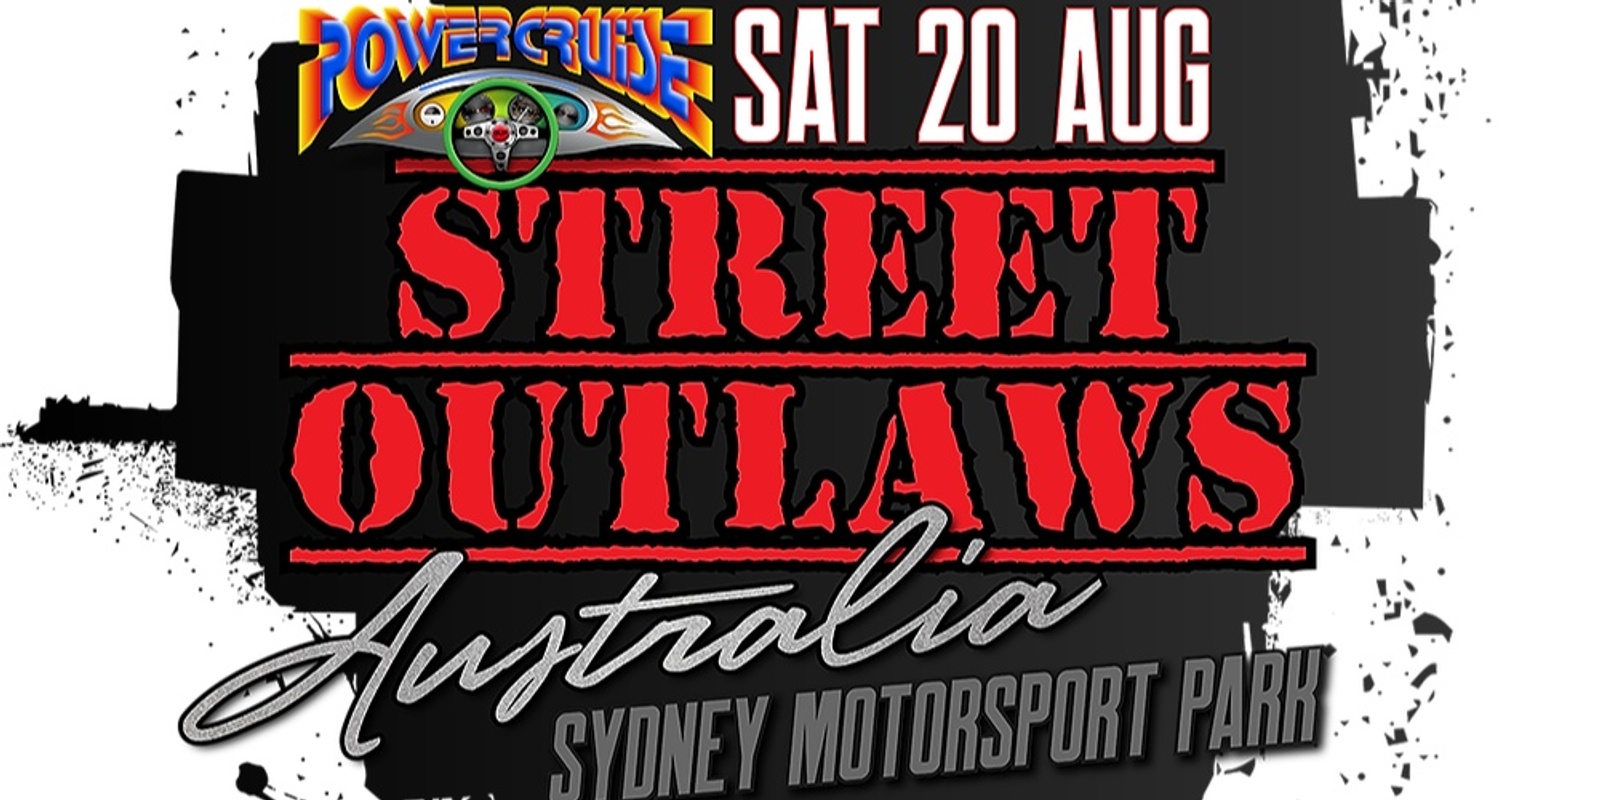 Street Outlaws Australia by Powercruise 20th August 2022 Sydney